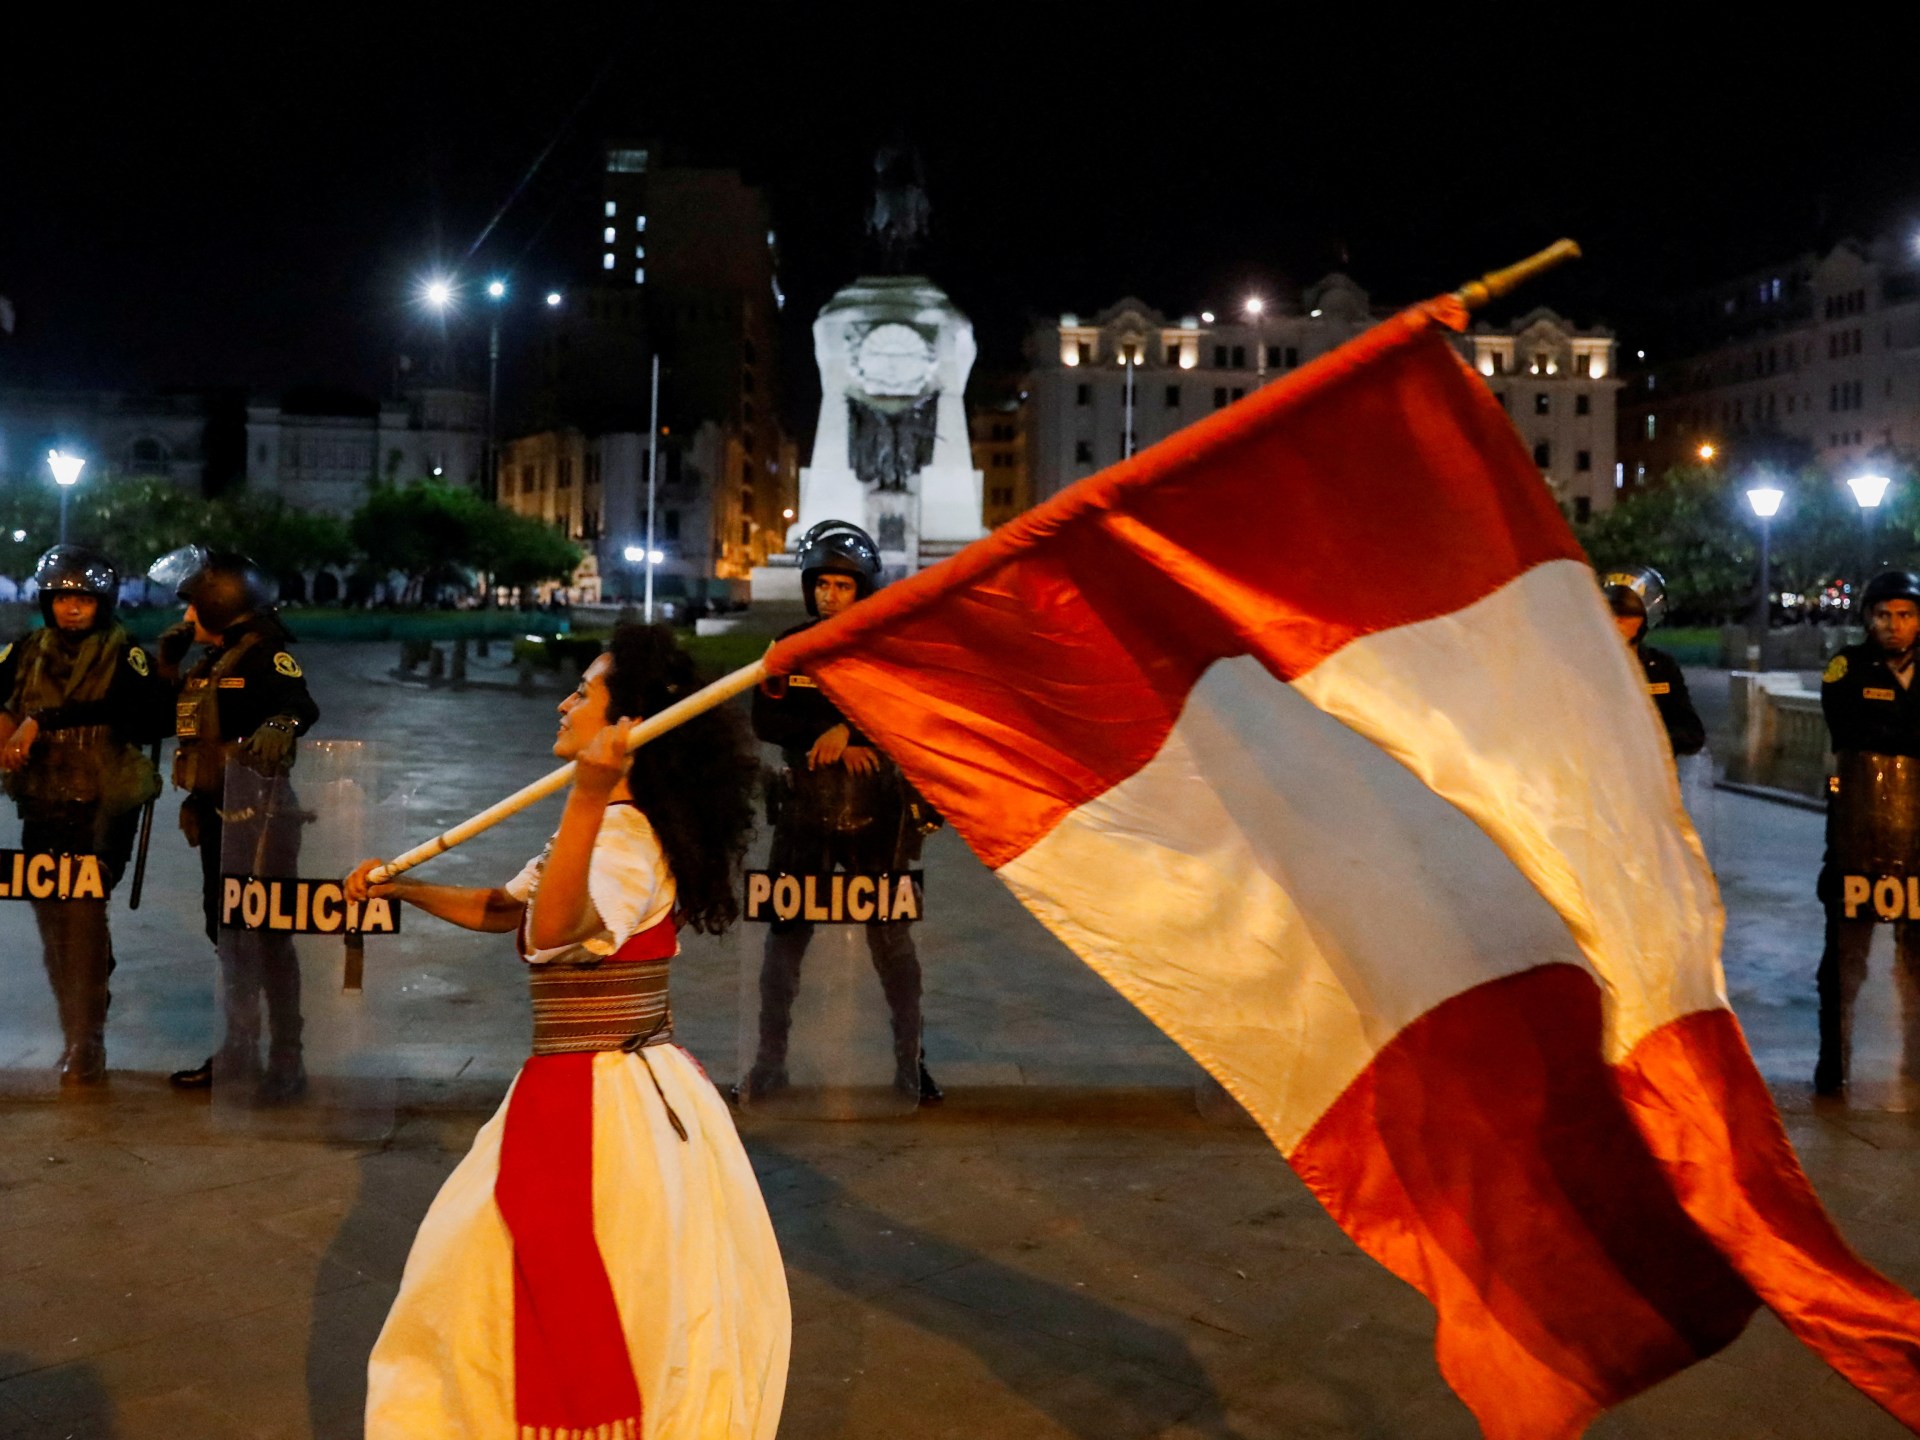 The human rights commission says that the repression in Peru can be described as a ‘massacre’